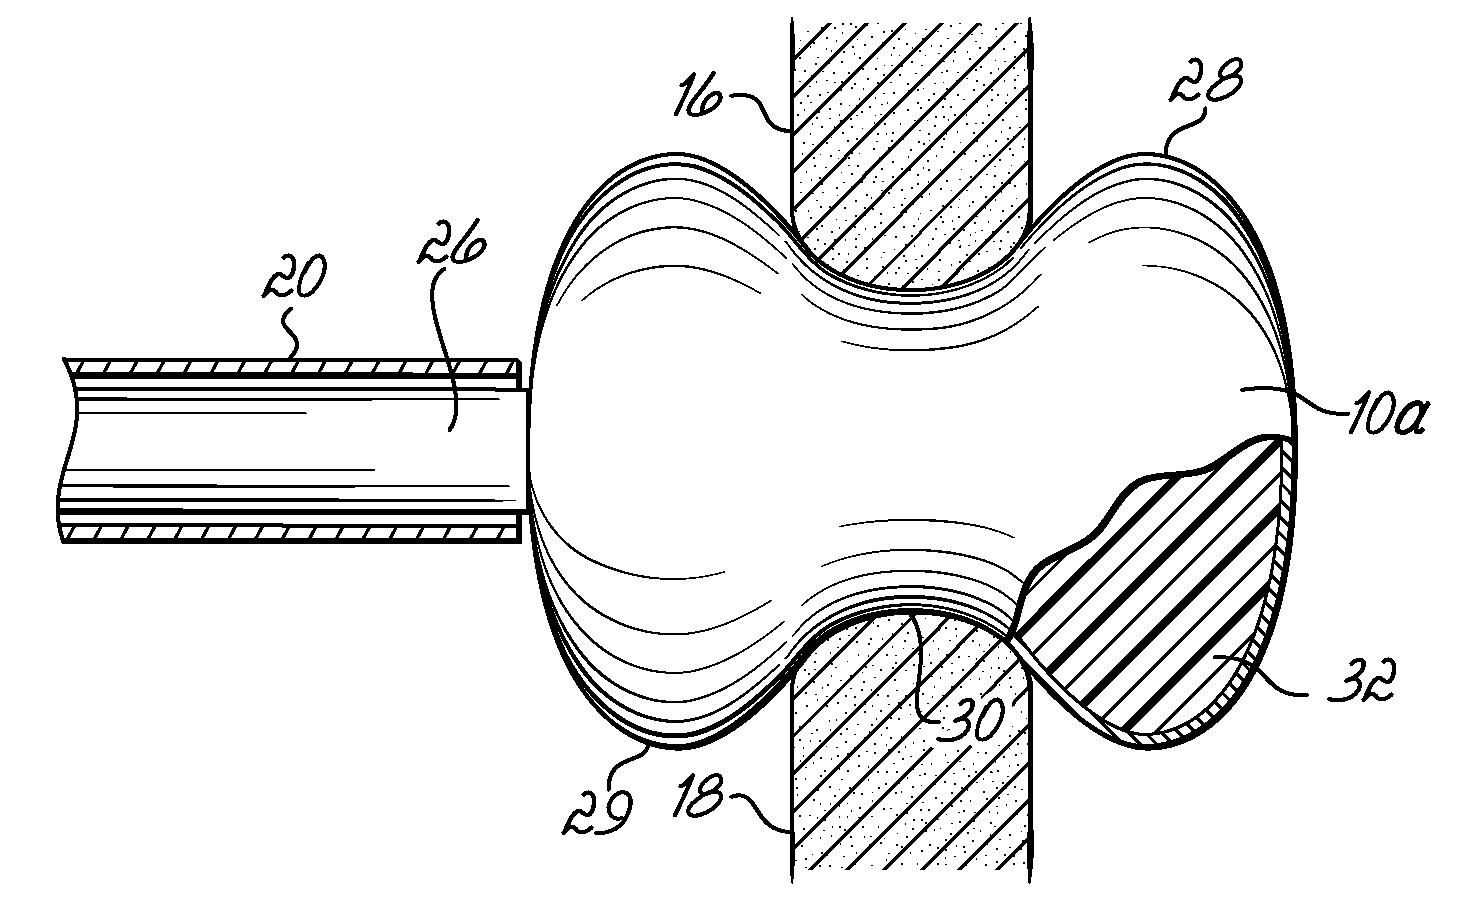 In-situ curable interspinous process spacer